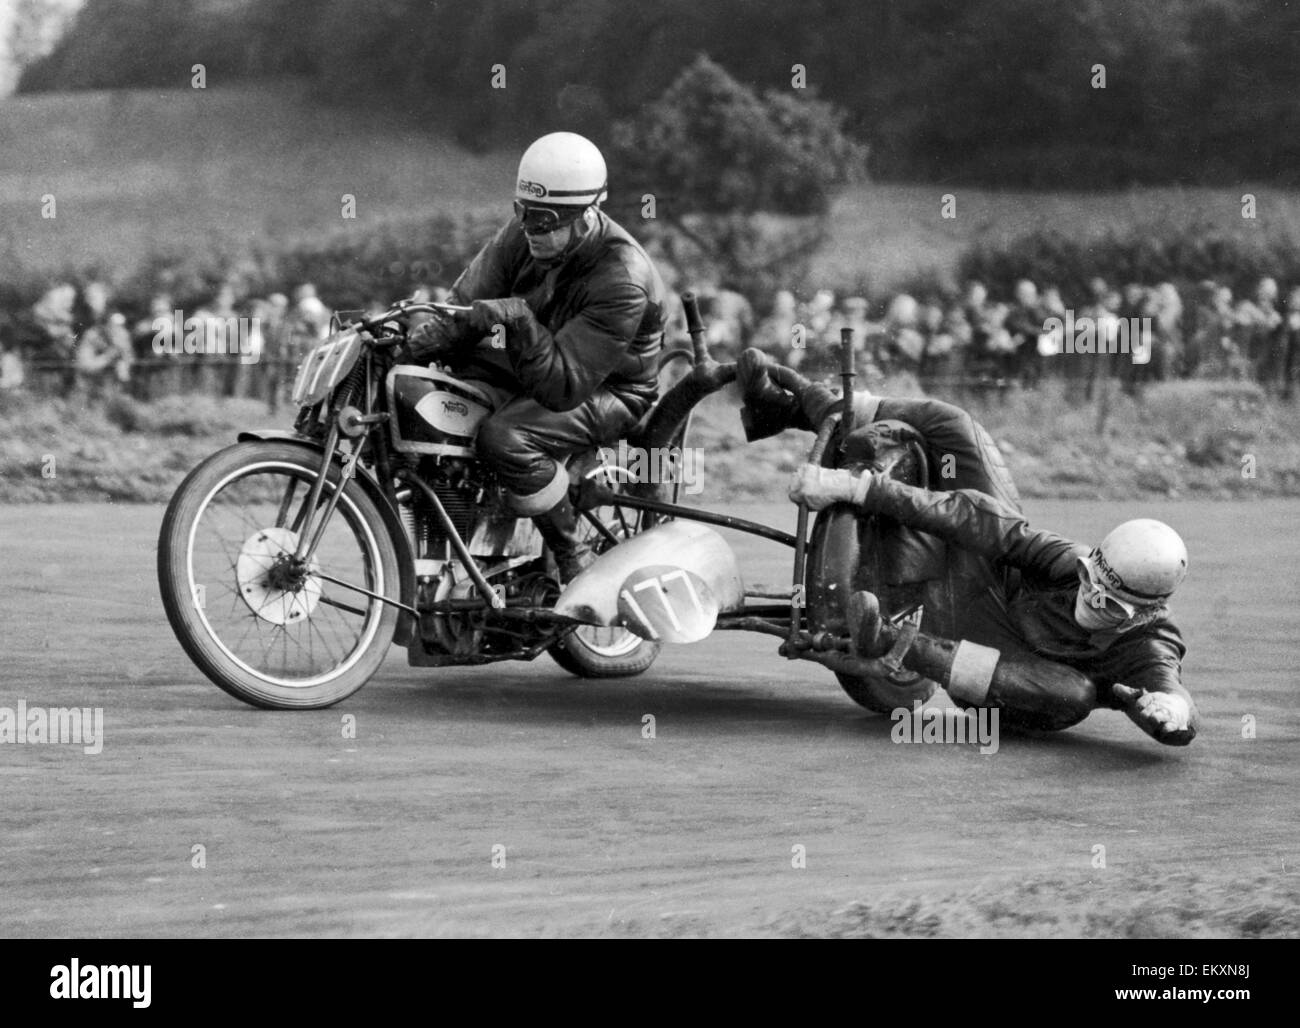 The things you have to do to keep upright! Not that this is normal motorcycle travel, of course, but taking bends at high speed, as these two are at the Brands Hatch road racemeeting, requires a lot of bias to one side or the other. And it can be mighty h Stock Photo